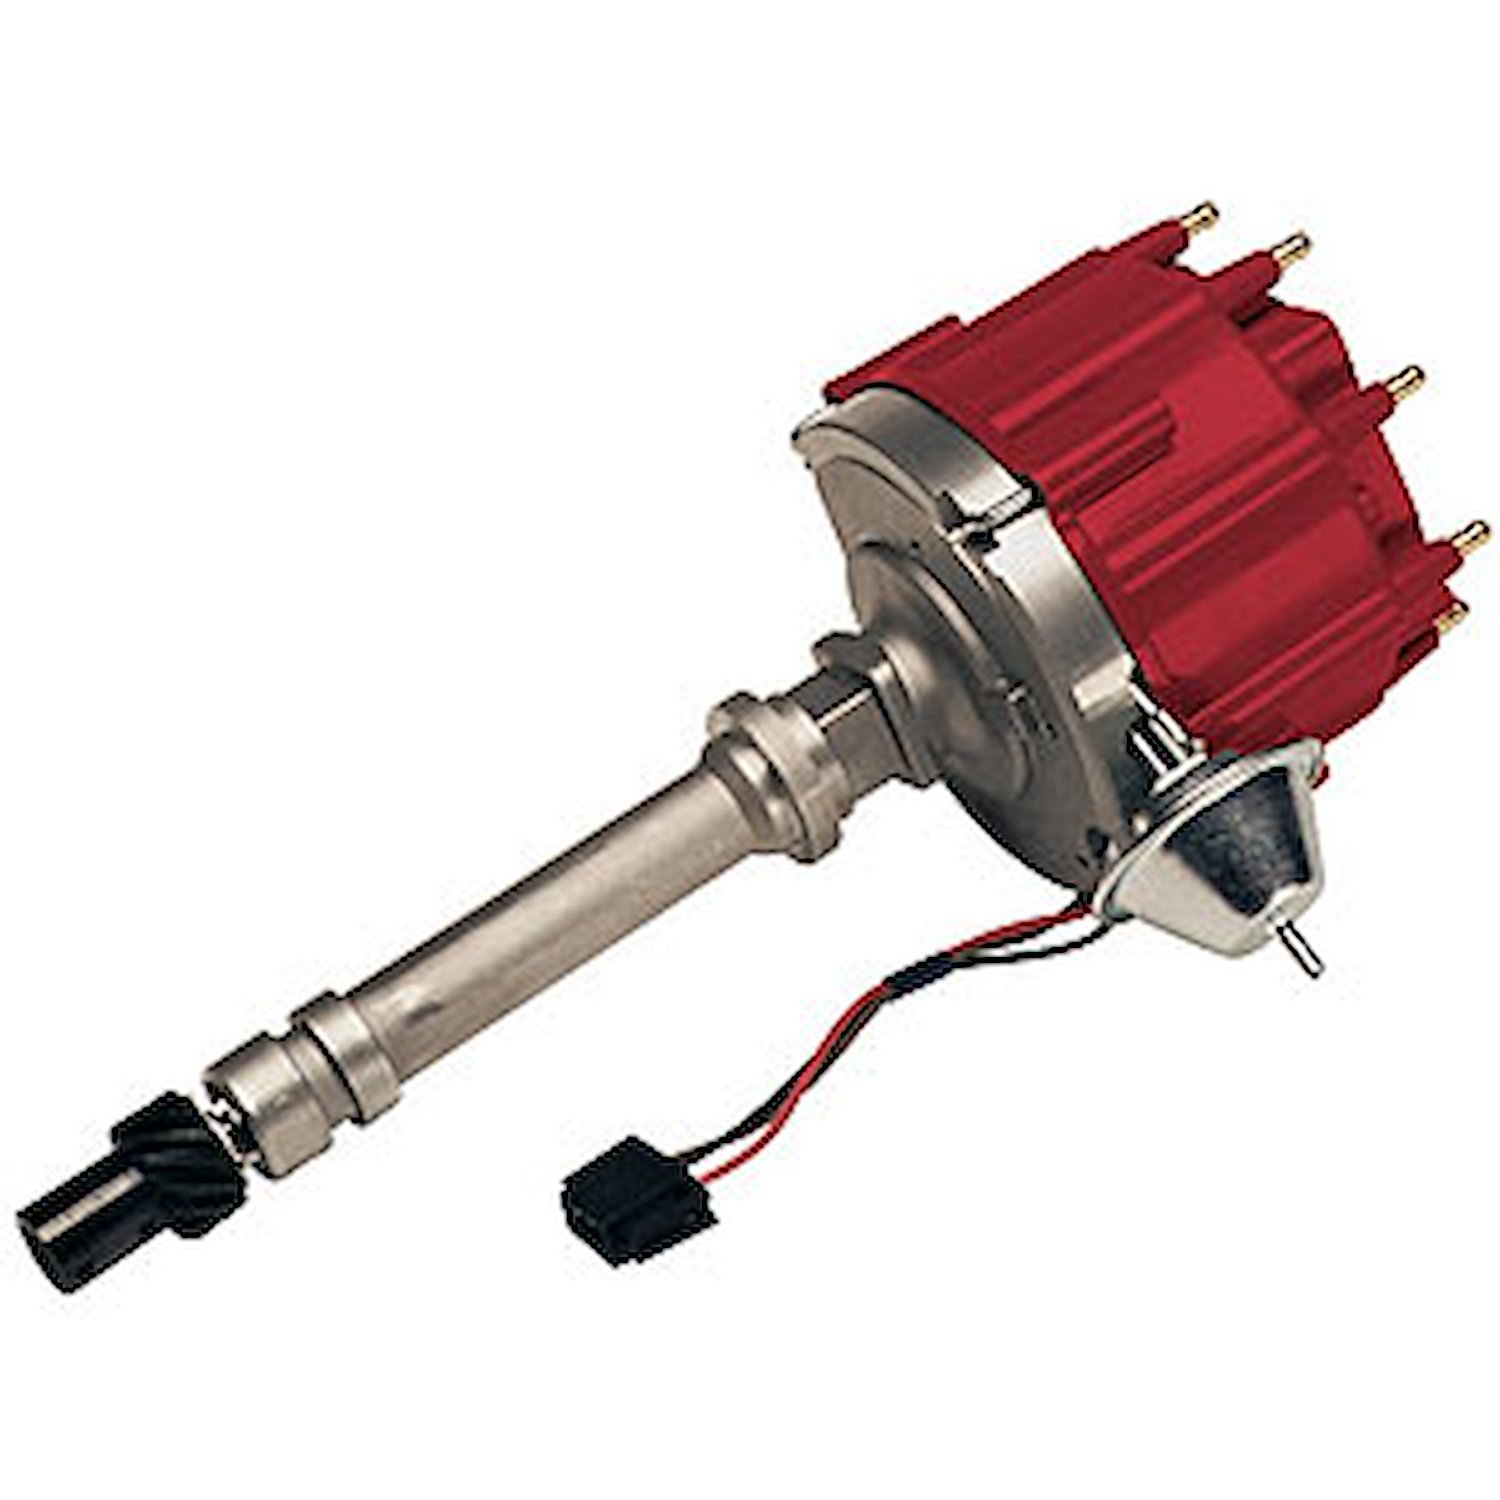 High Performance HEI Distributor for 1955-1982 Small Block & Big Block Chevy with Red Cap